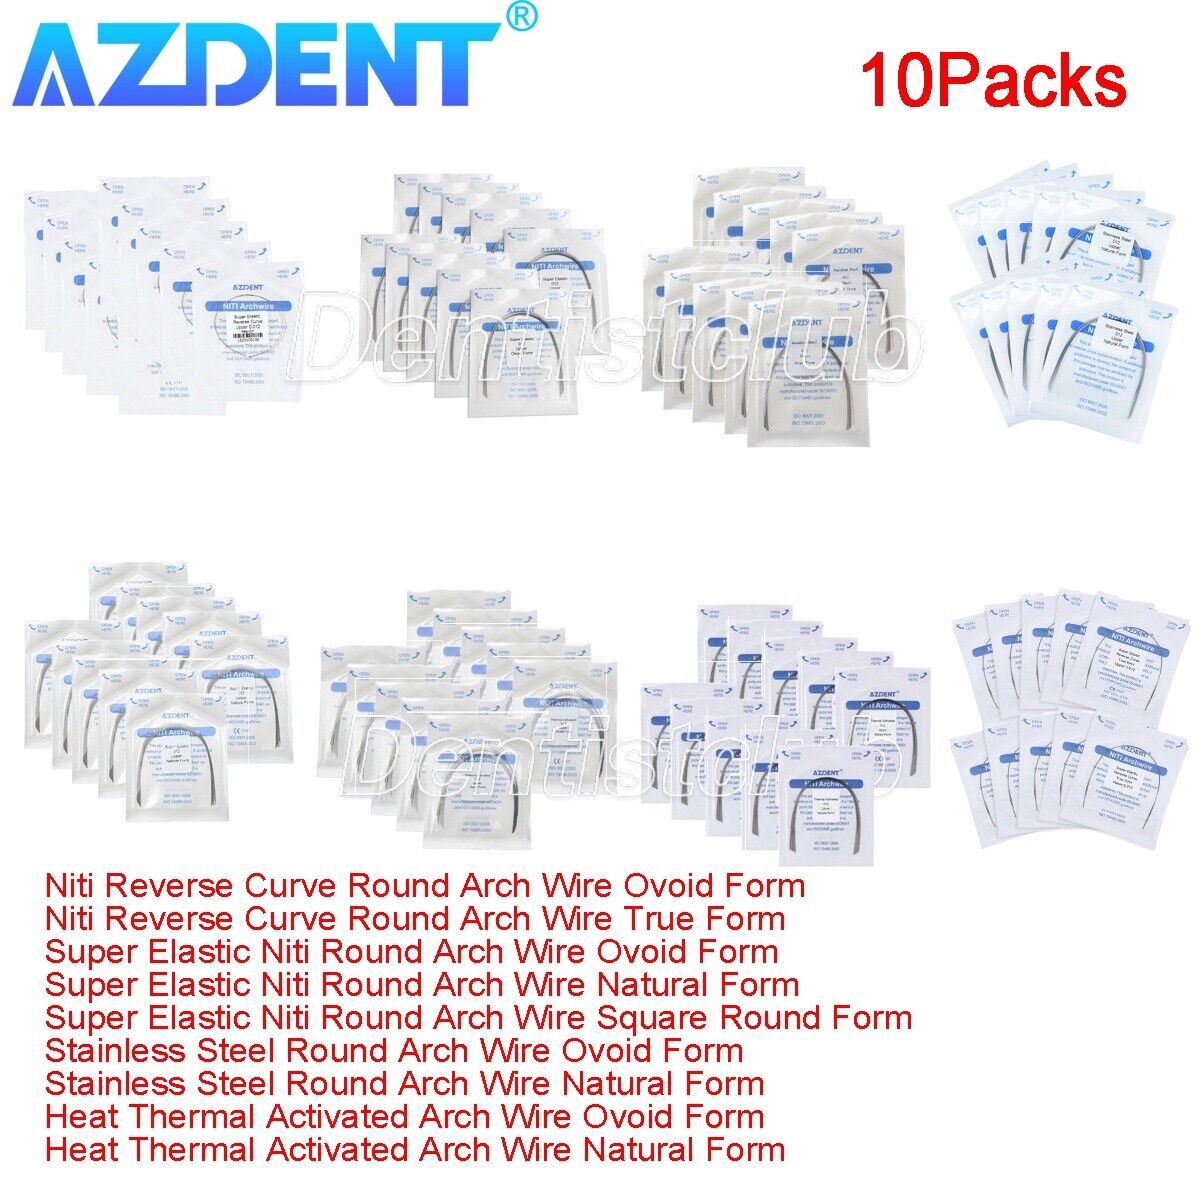 10Pack AZDENT Dental Orthodontic Wire Elastic Niti Arch Wire Round Thermal/Steel